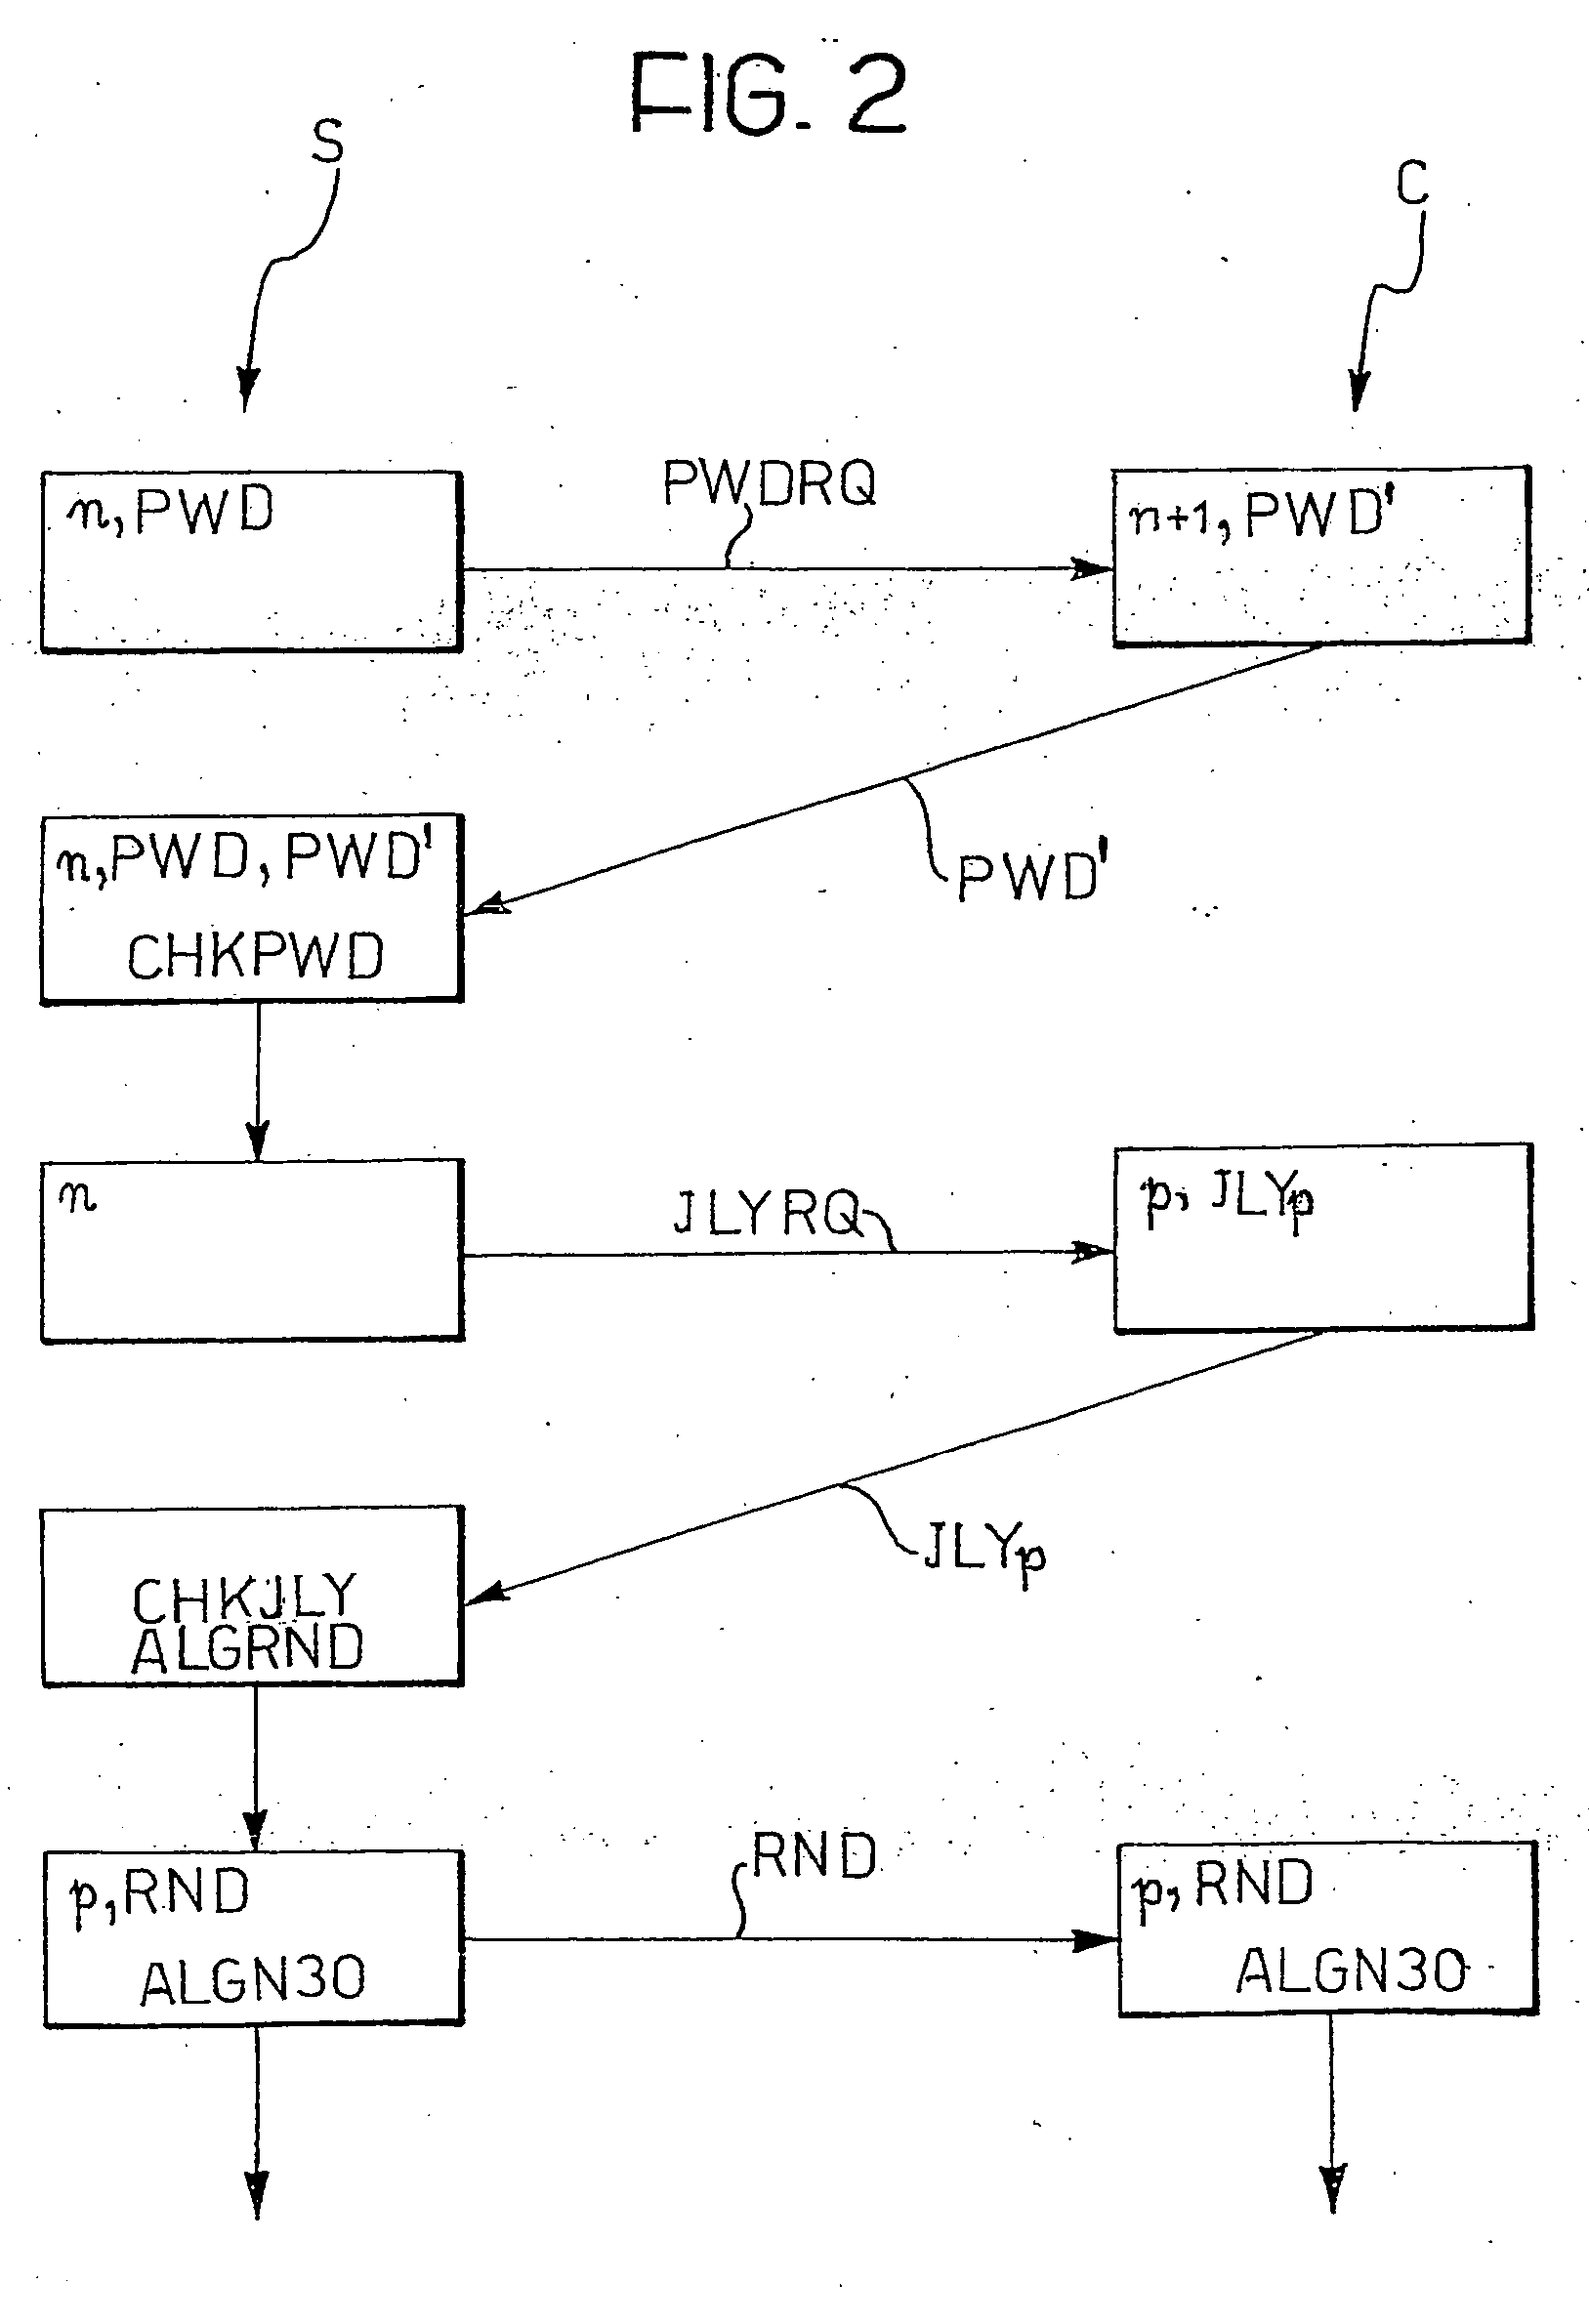 Method and system for identifying an authorized individual by means of unpredictable single-use passwords